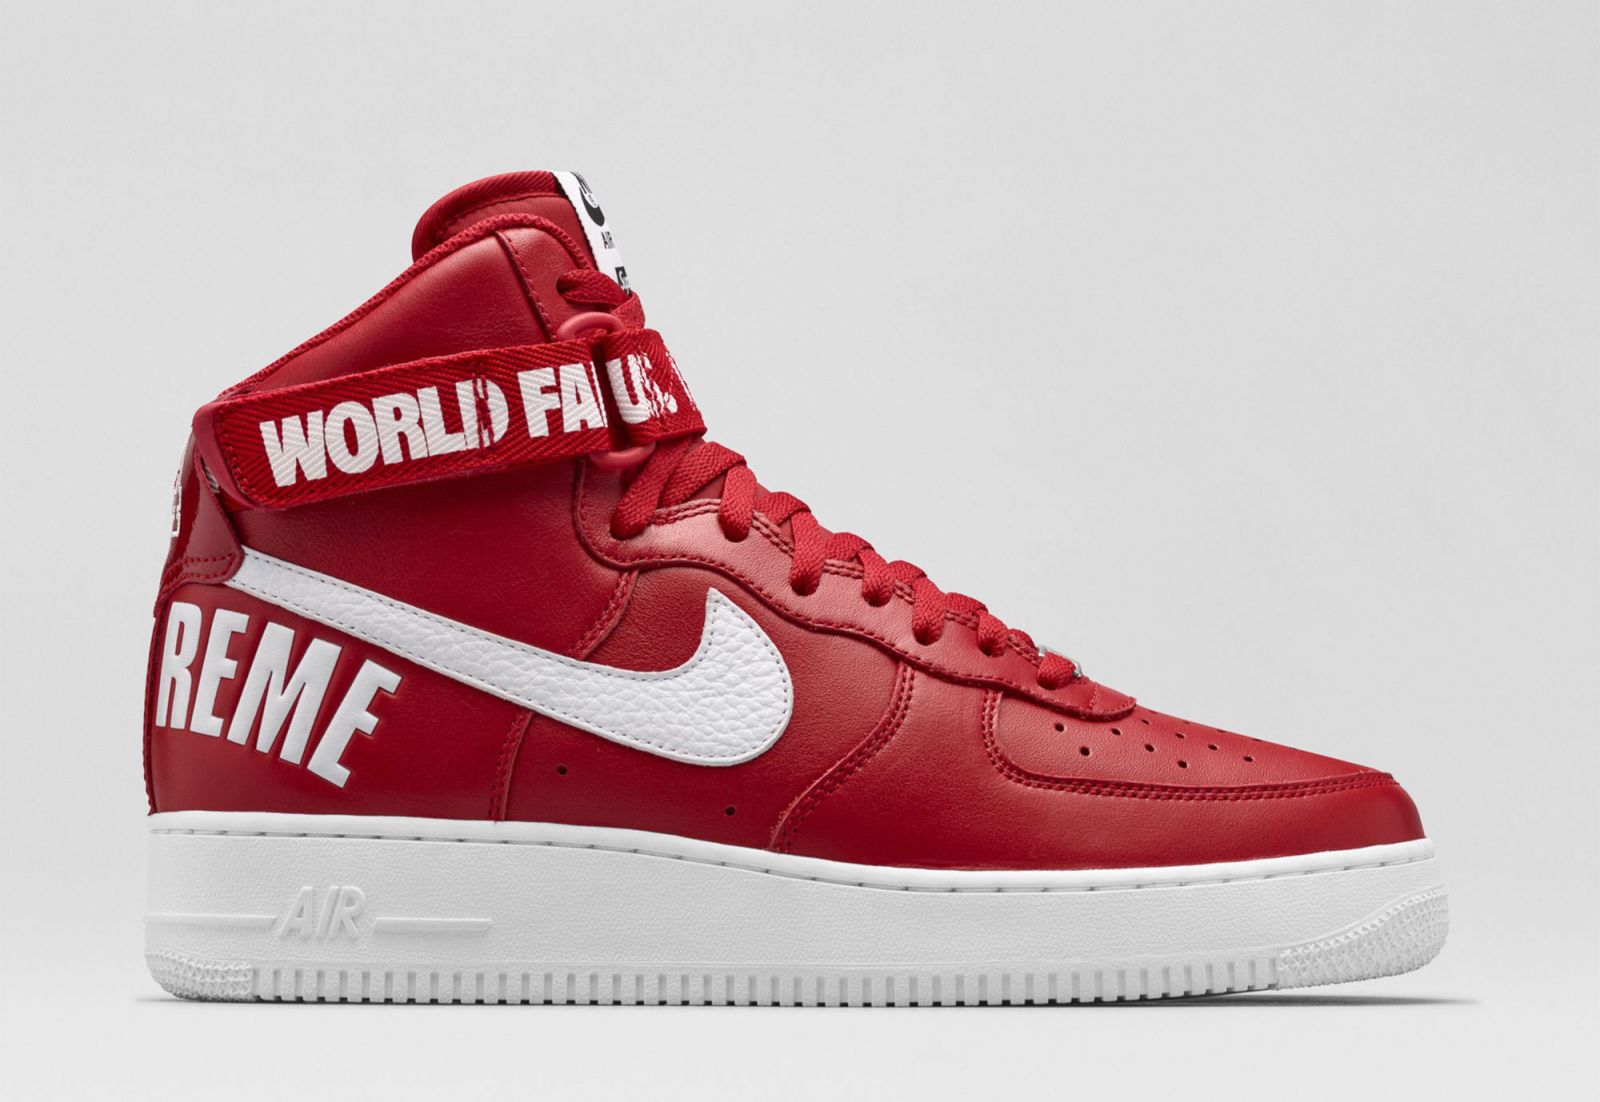 You Might Have Another Chance at the Supreme x Nike Air Force 1 High ...